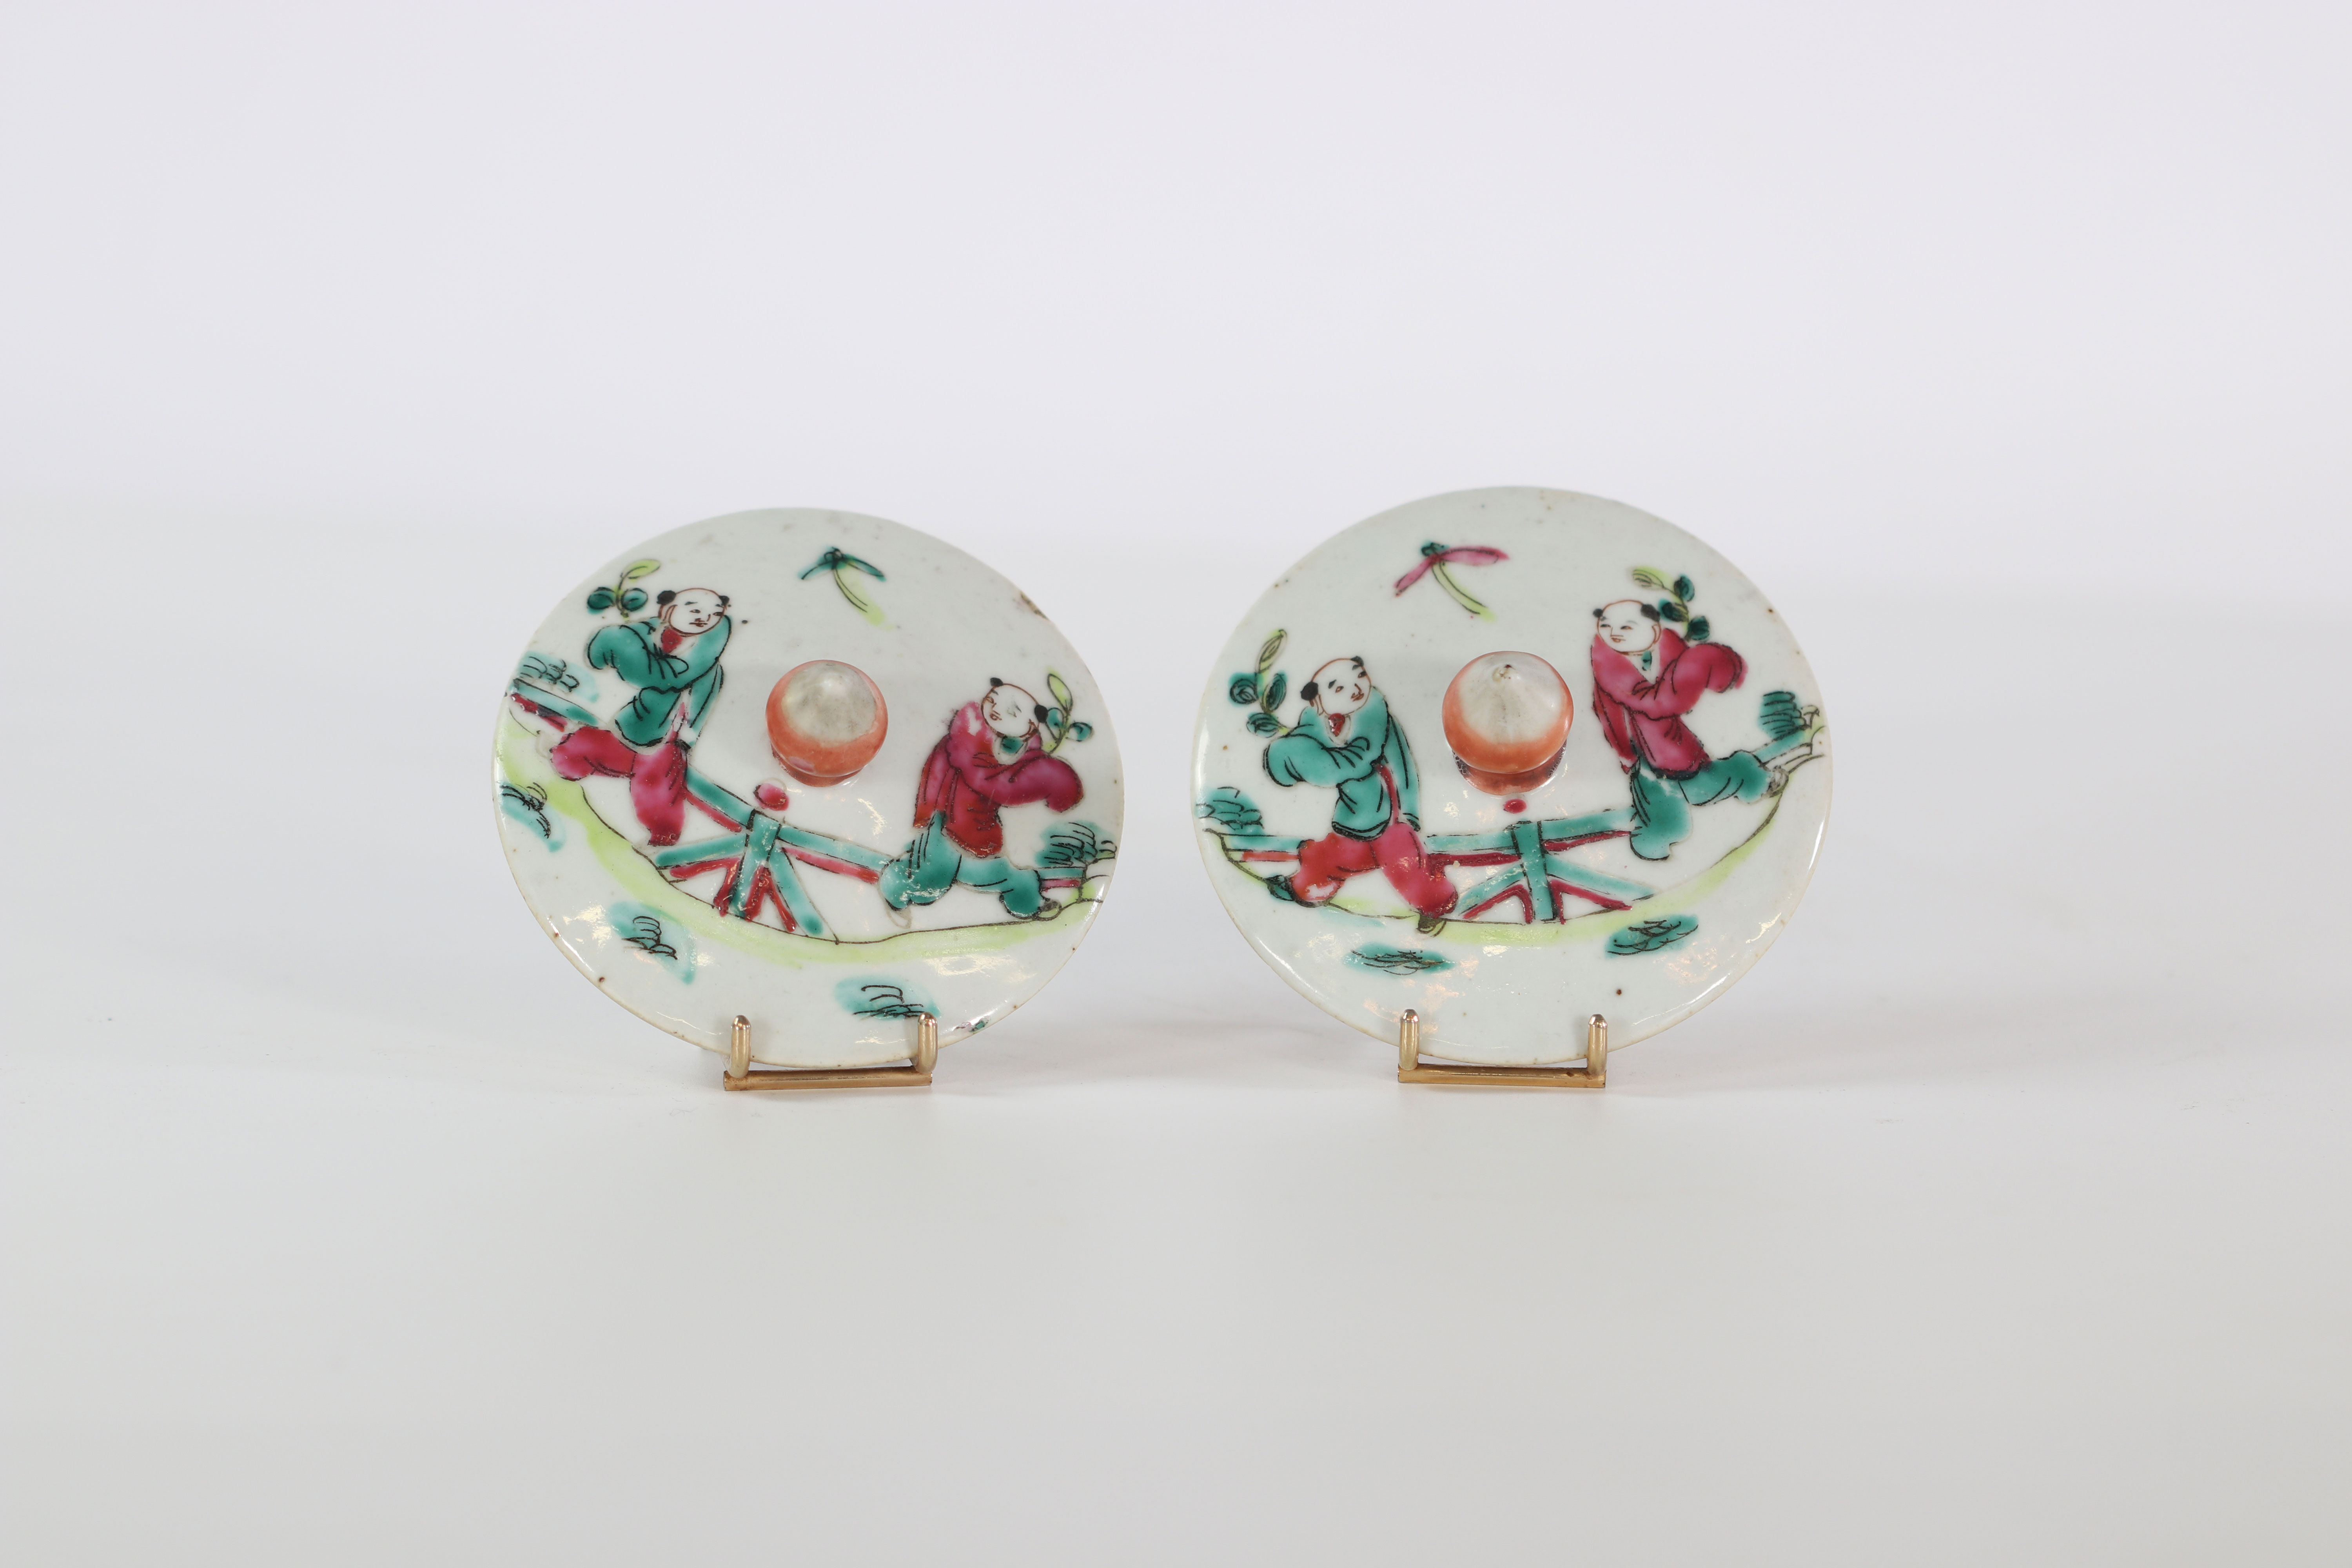 China pair of famille rose covered porcelain vase decorated with characters and dragons 19th - Bild 5 aus 5